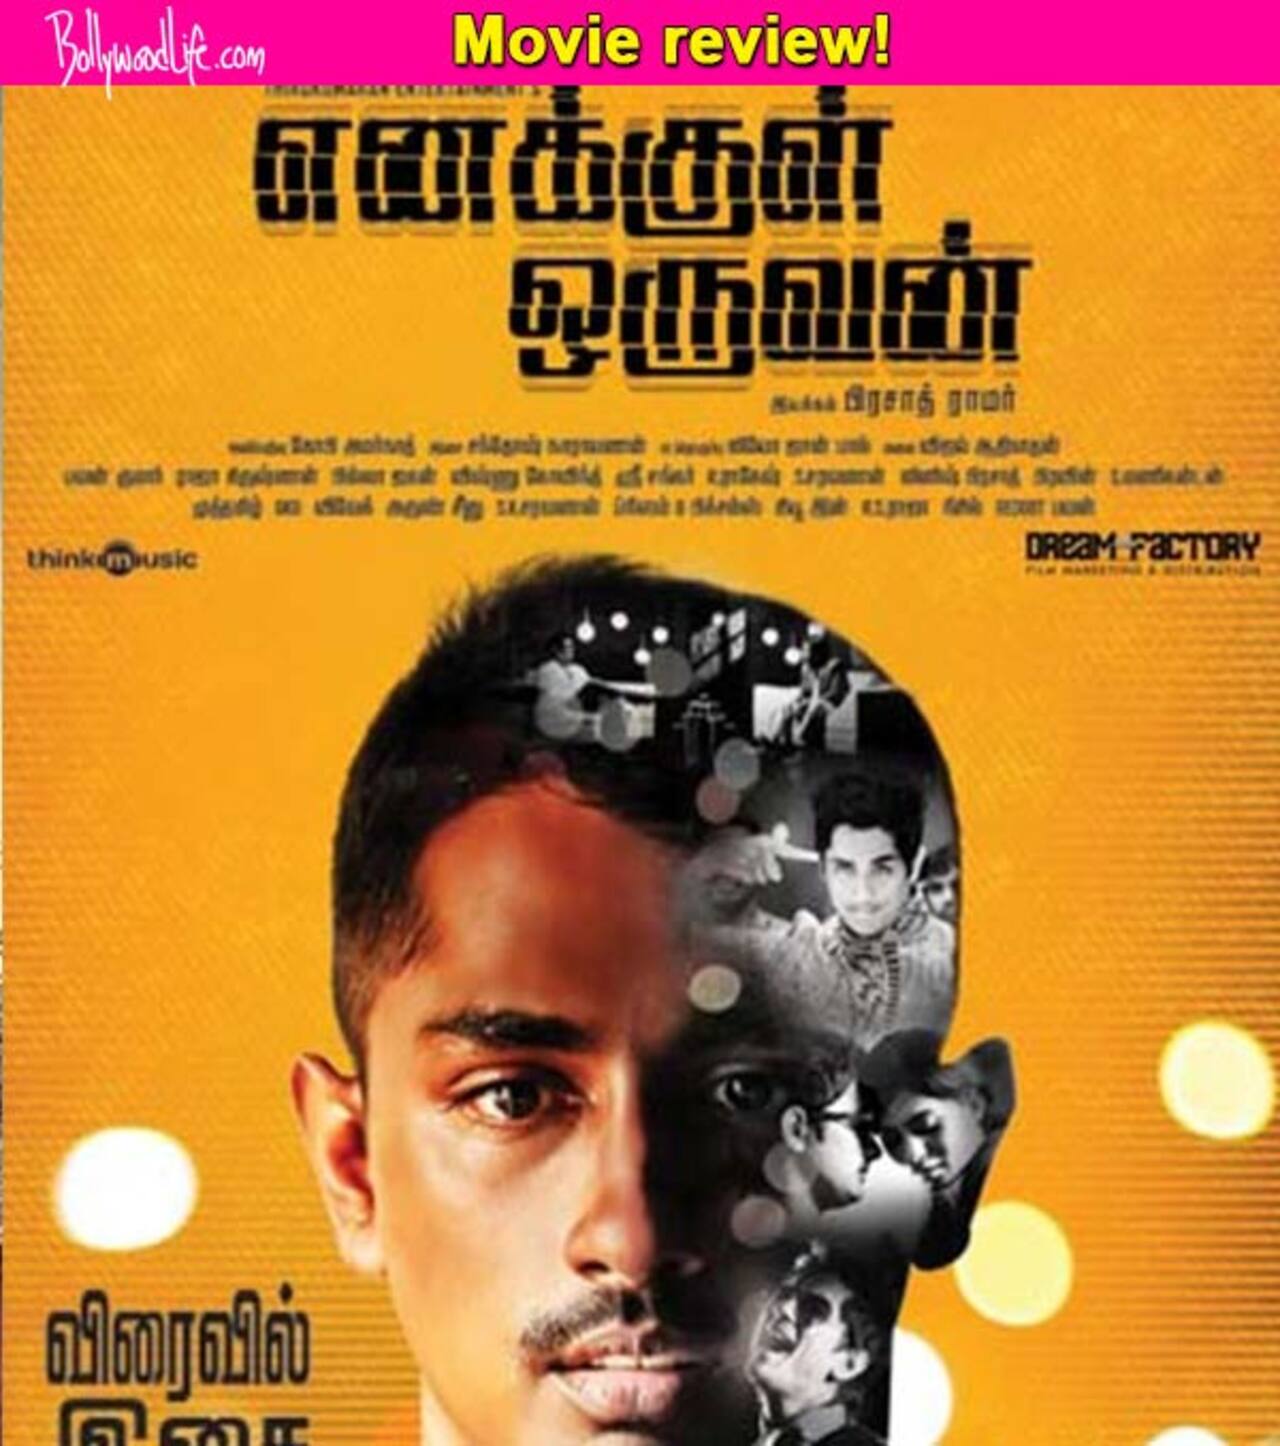 Enakkul Oruvan movie review: Siddharth shines as an actor in this faithful remake of Lucia!